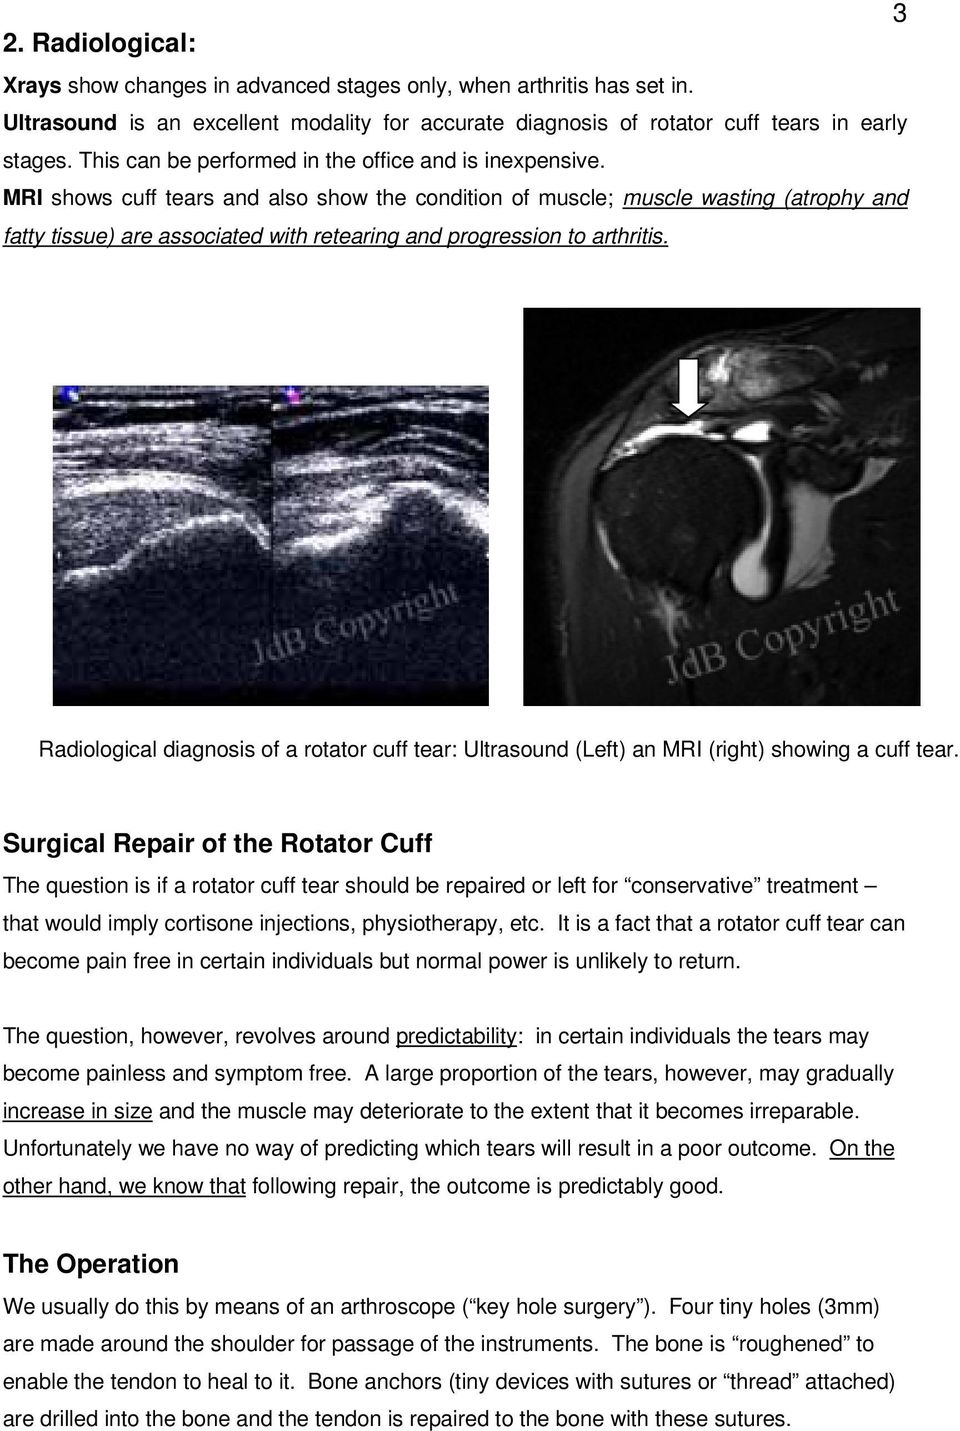 MRI shows cuff tears and also show the condition of muscle; muscle wasting (atrophy and fatty tissue) are associated with retearing and progression to arthritis.